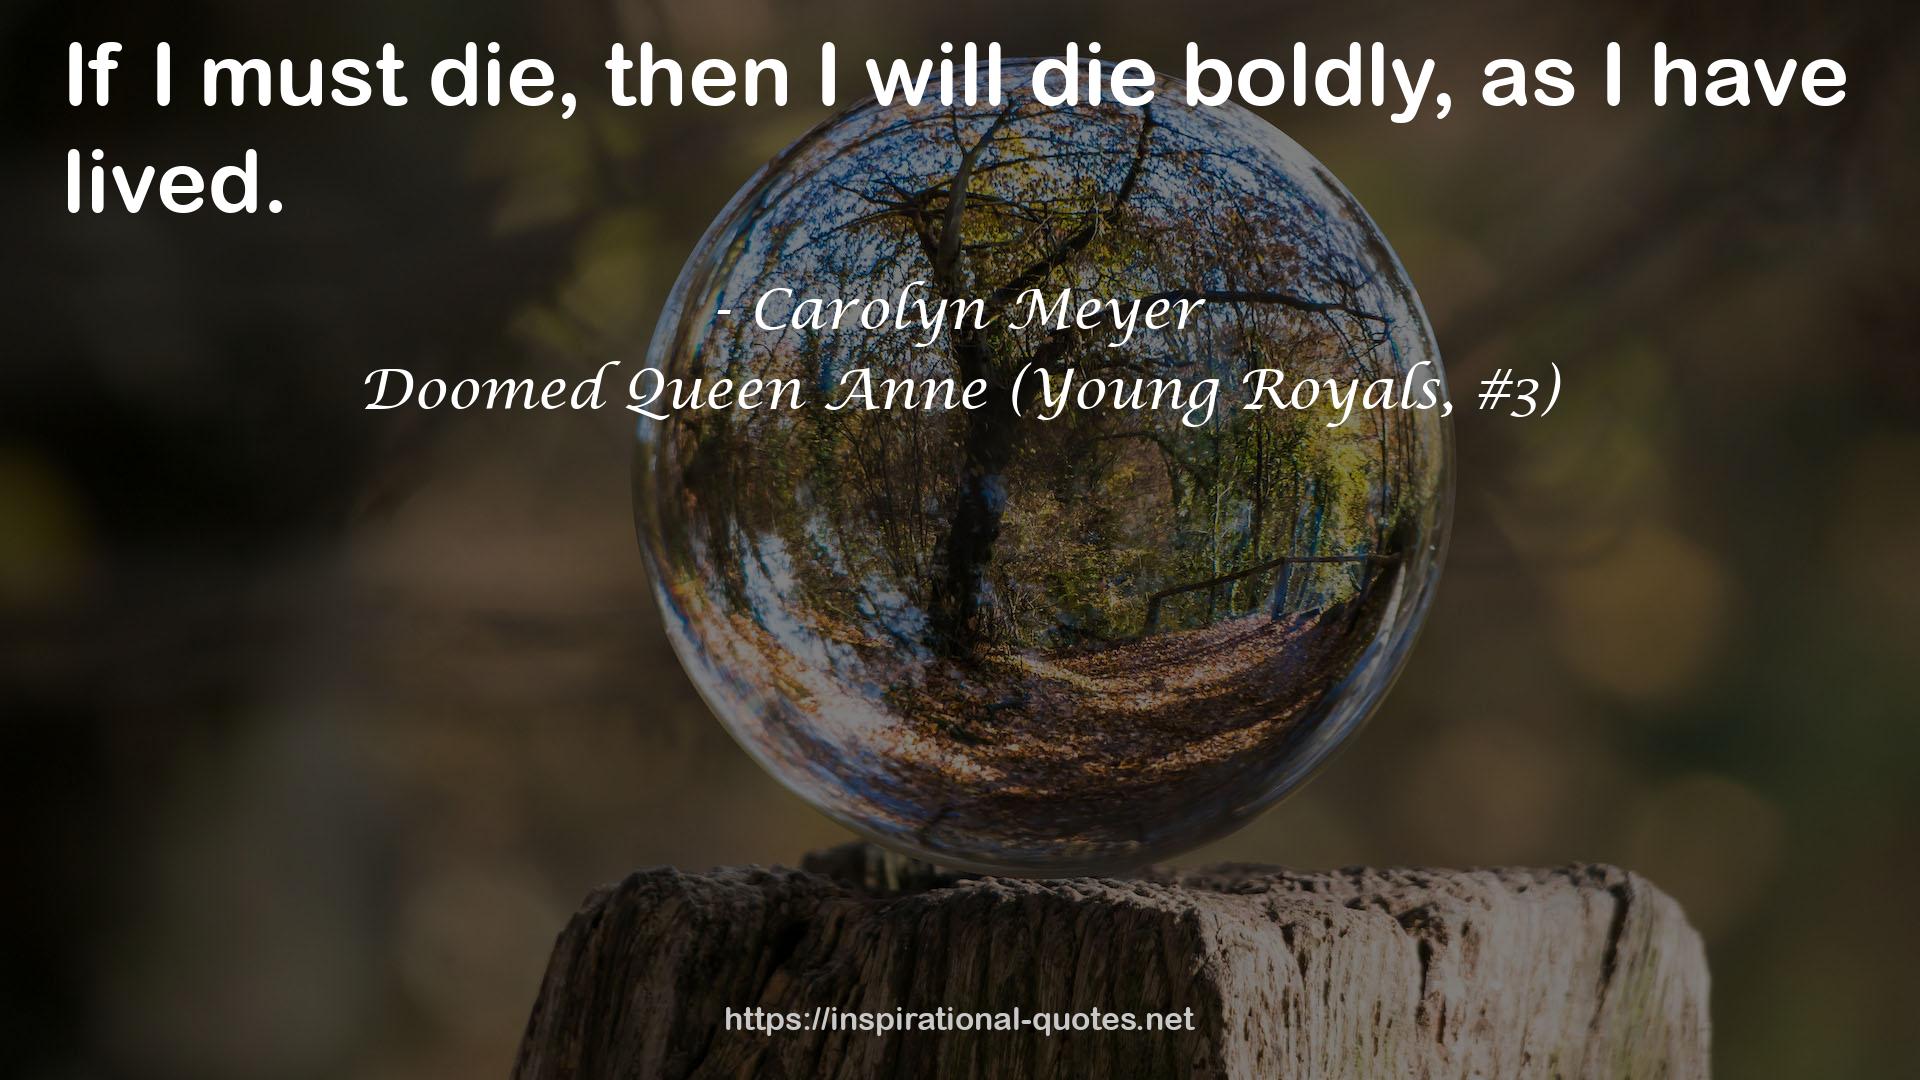 Doomed Queen Anne (Young Royals, #3) QUOTES